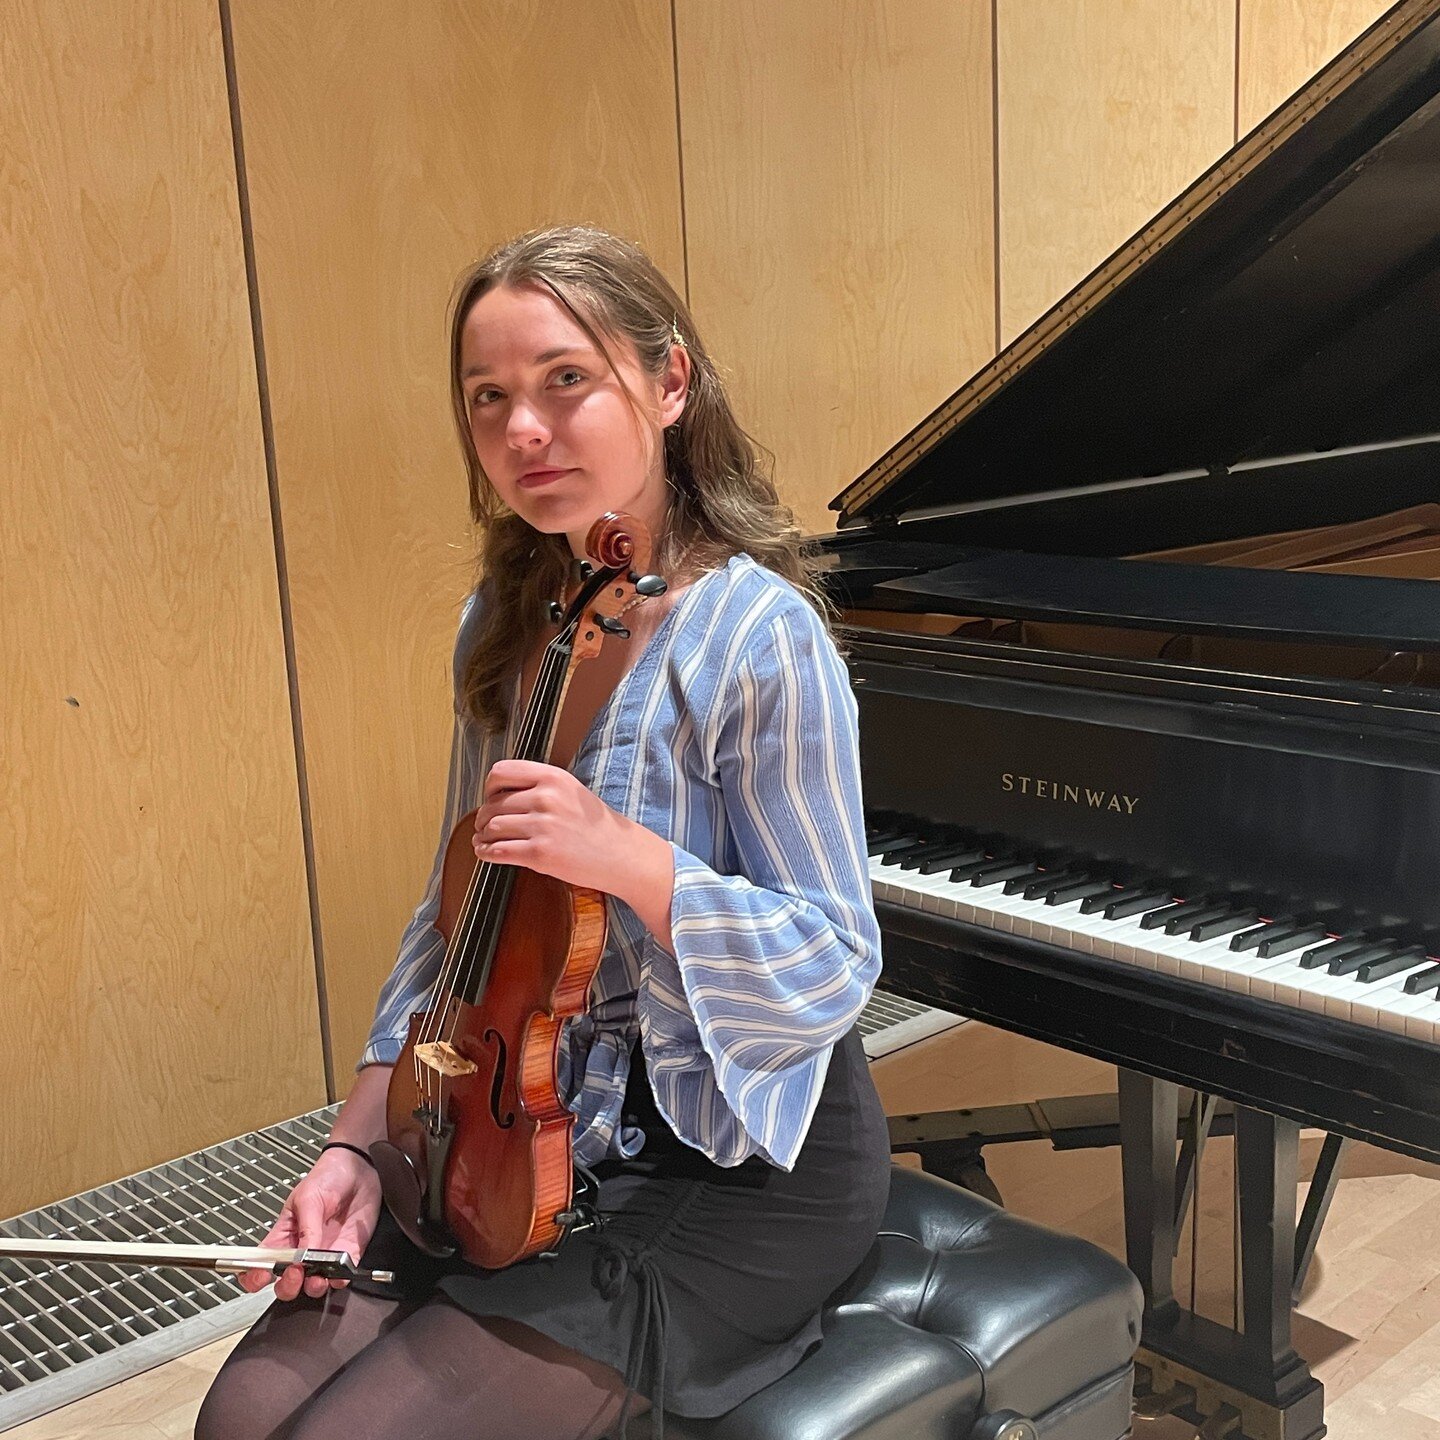 We are lucky enough to host two young guest violinists at our upcoming concert on May 21st. The first of the two, Sedona Kmen, will serve as our guest concertmaster, and we couldn't be more pleased! 

Sedona Kmen has been studying violin for 12 years